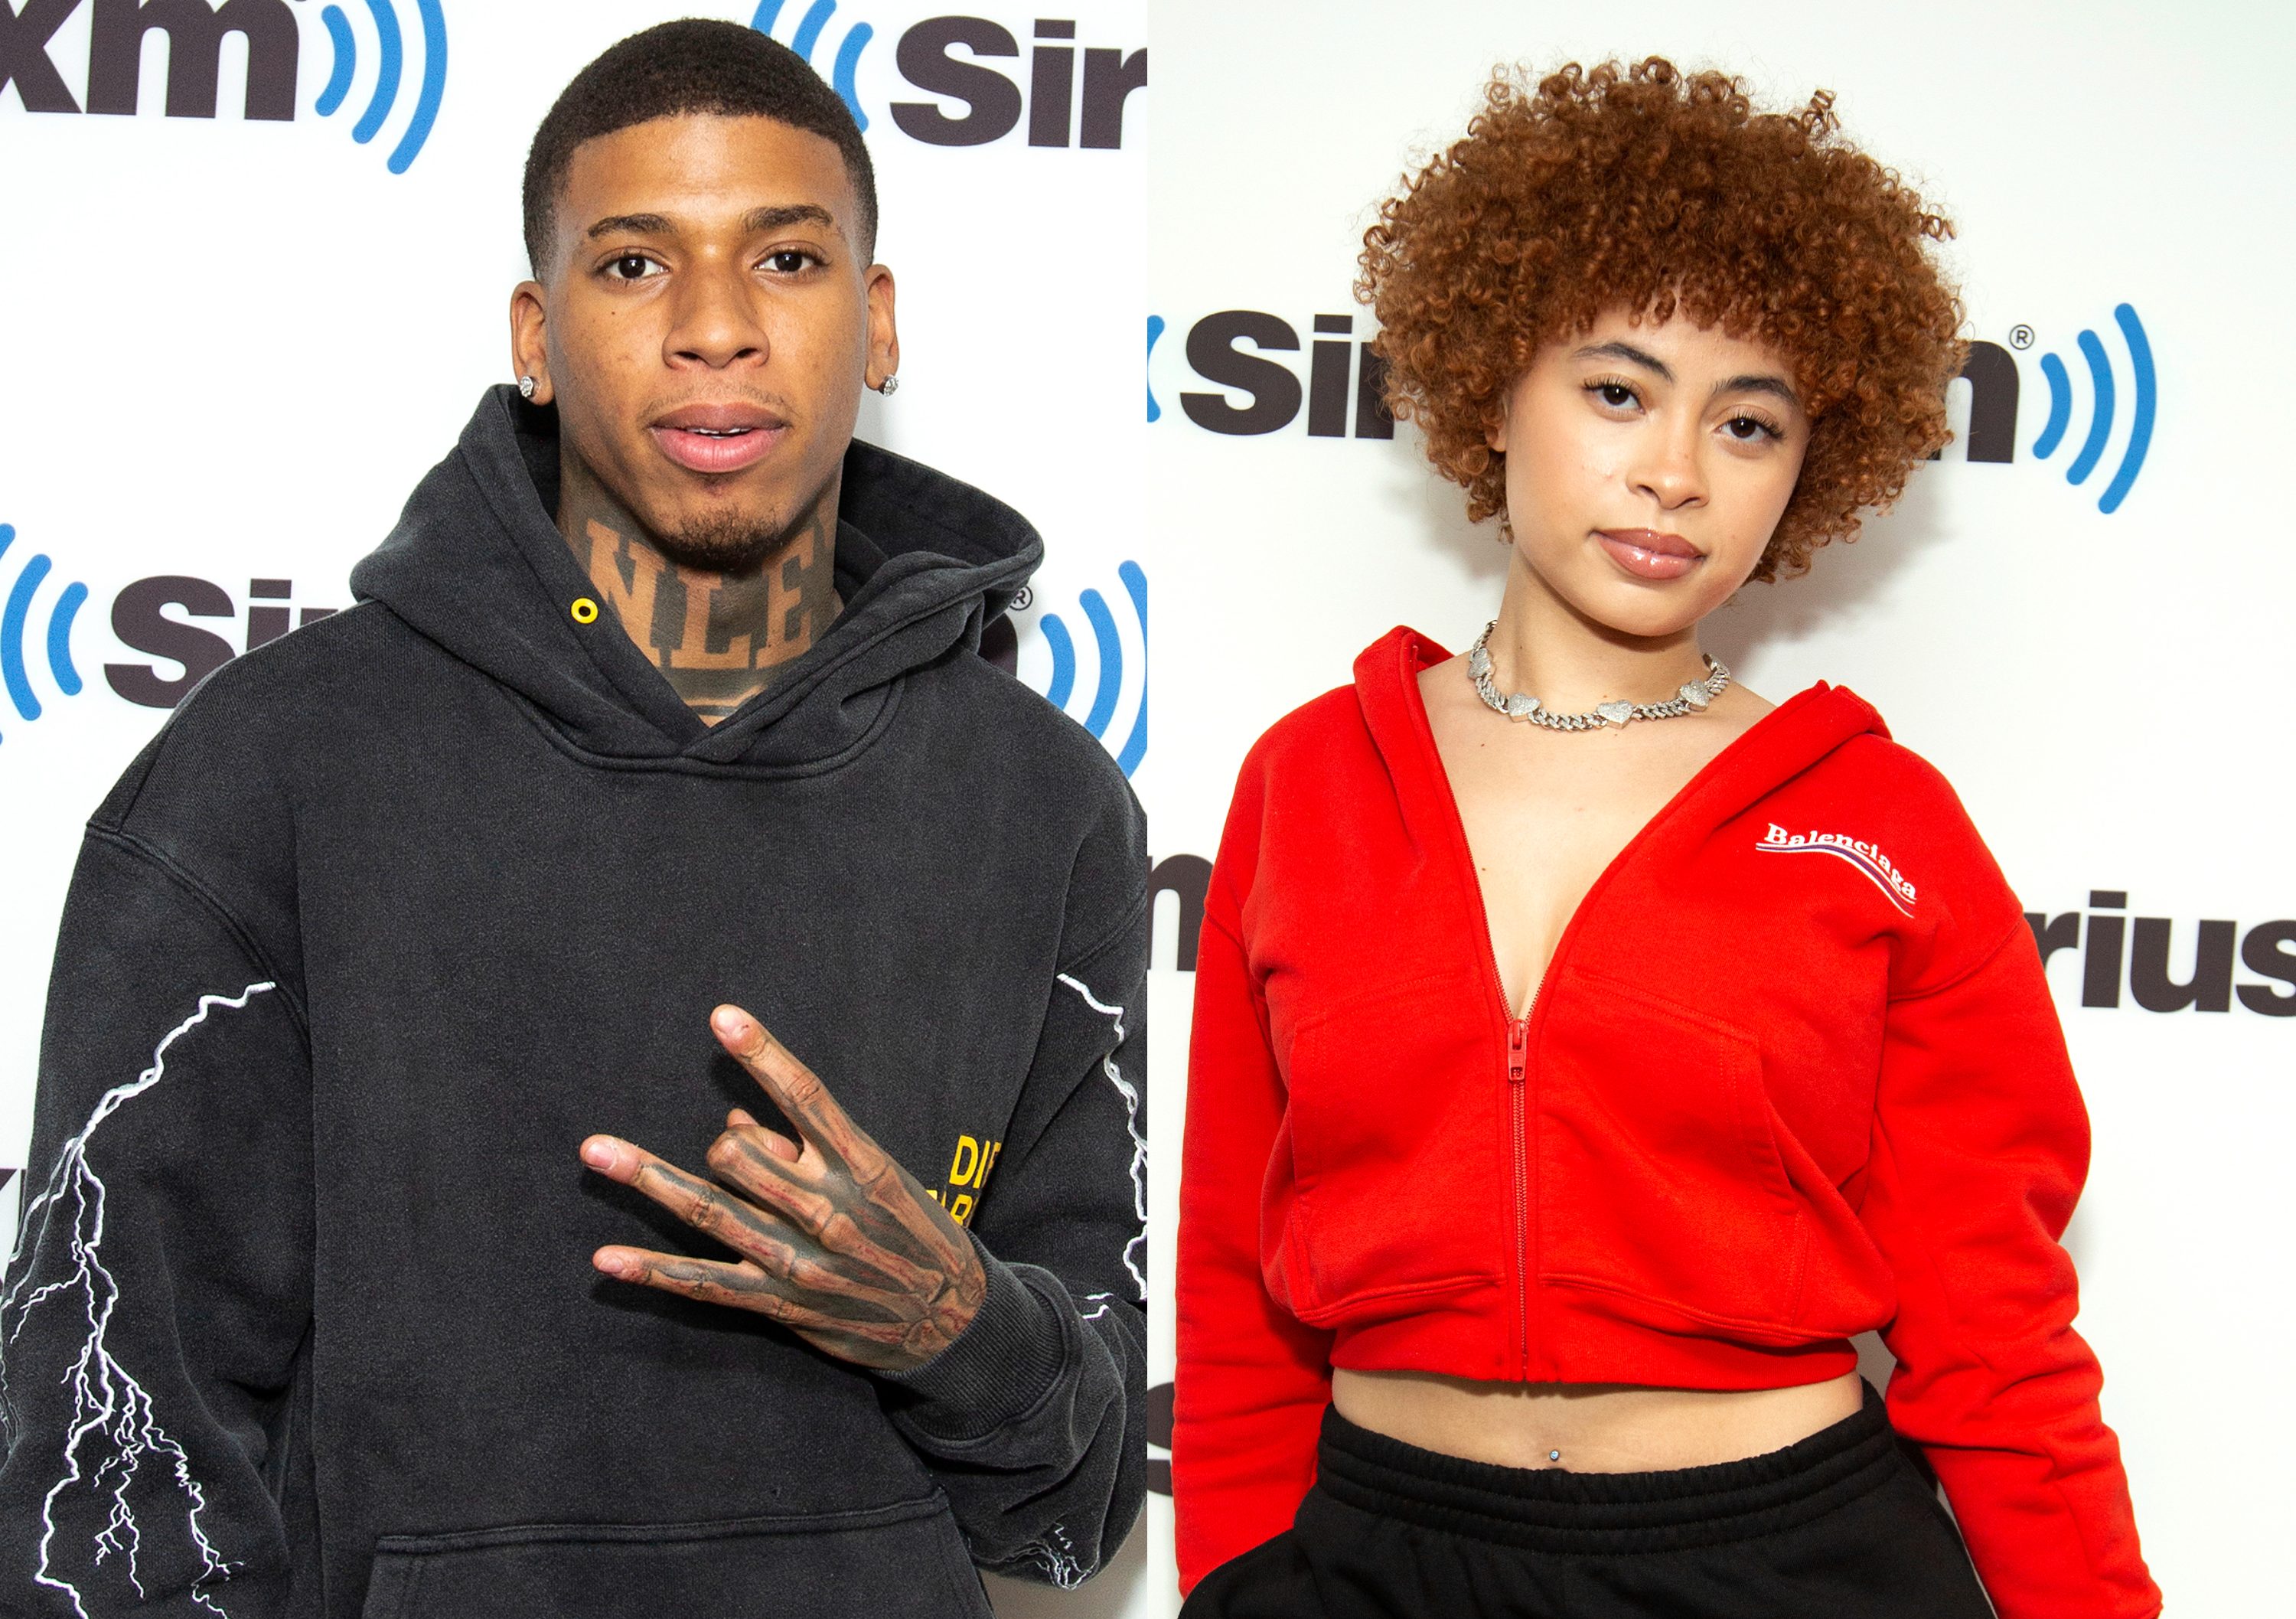 NLE Choppa Suggests Ice Spice Changed Her Number After Texting Him